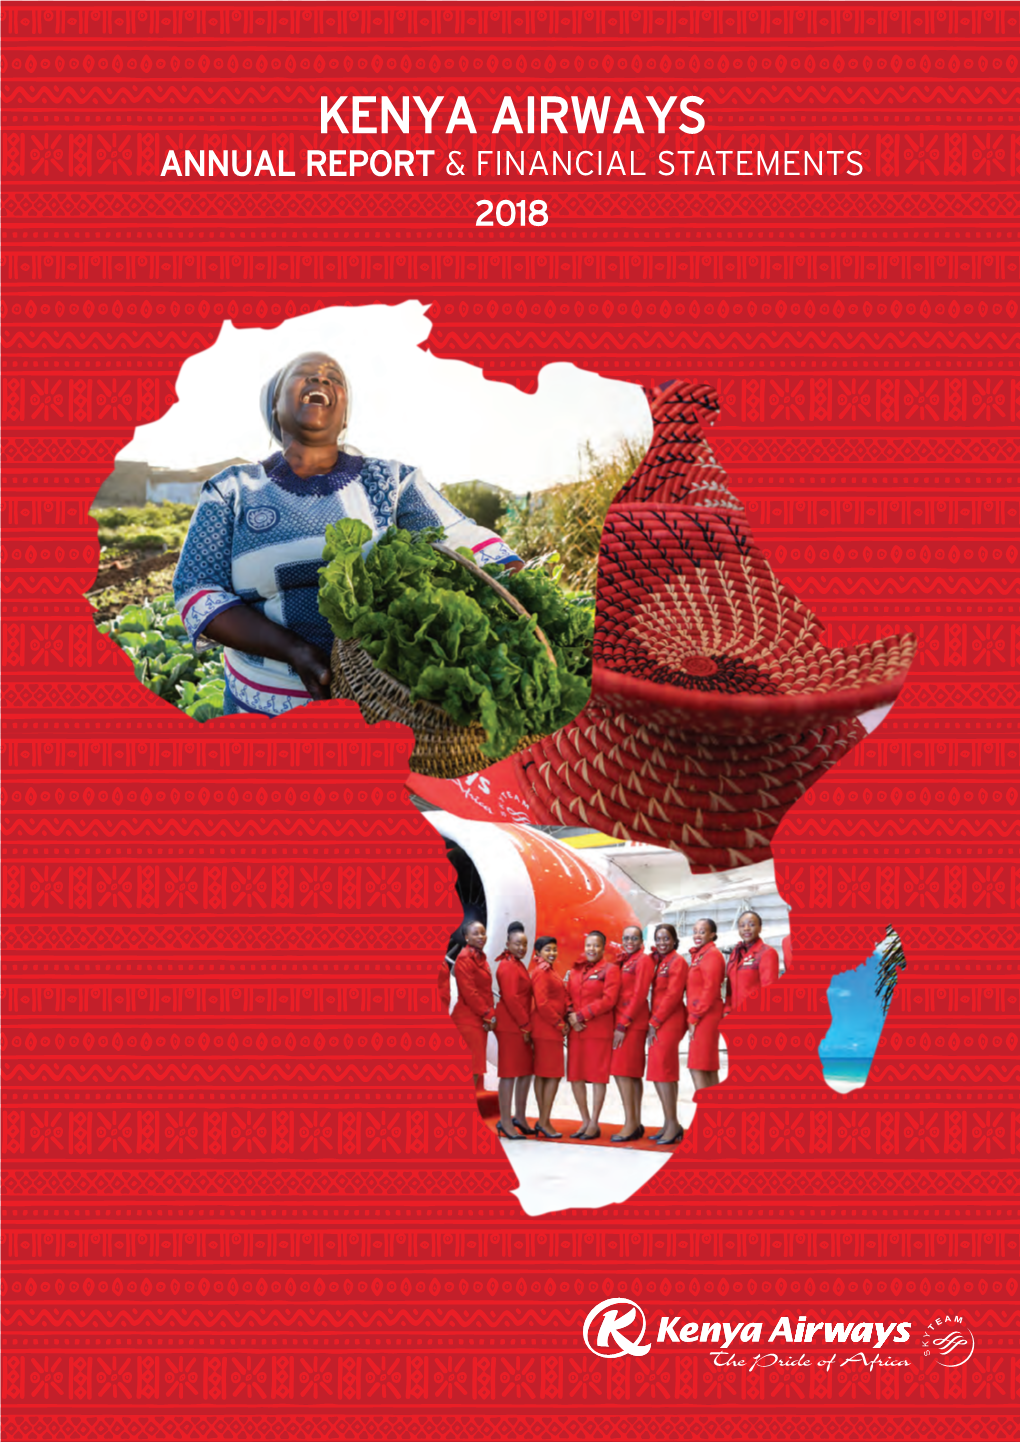 Kenya Airways Annual Report & Financial Statements 2018 Our Core Purpose Is to Contribute to the Sustainable Development of Africa